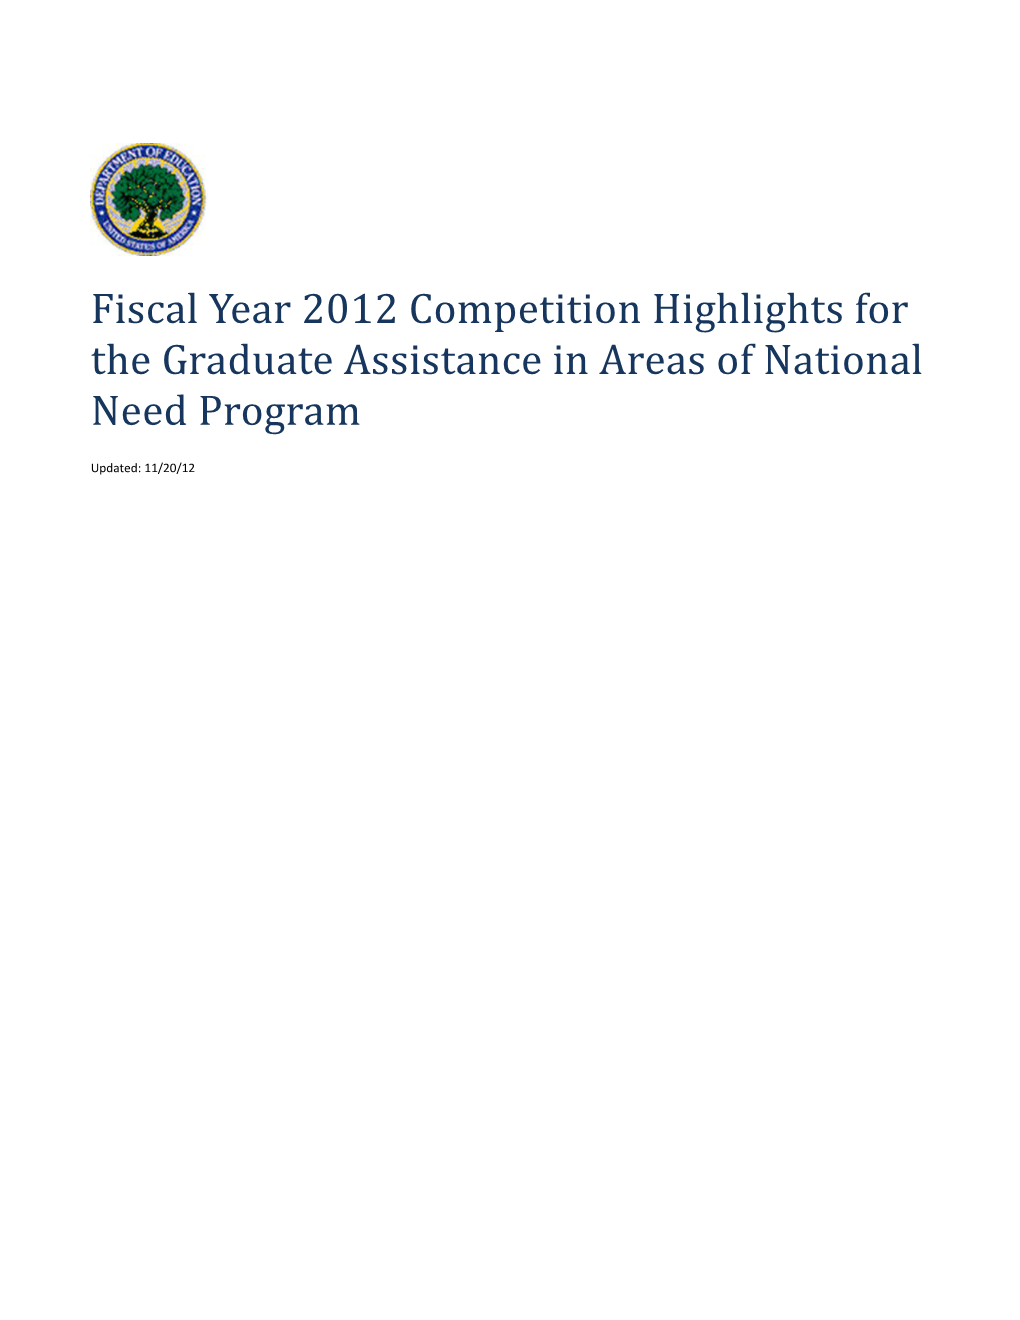 FY 2012 Competition Highlights for the Graduate Assistance in Areas of National Need Program